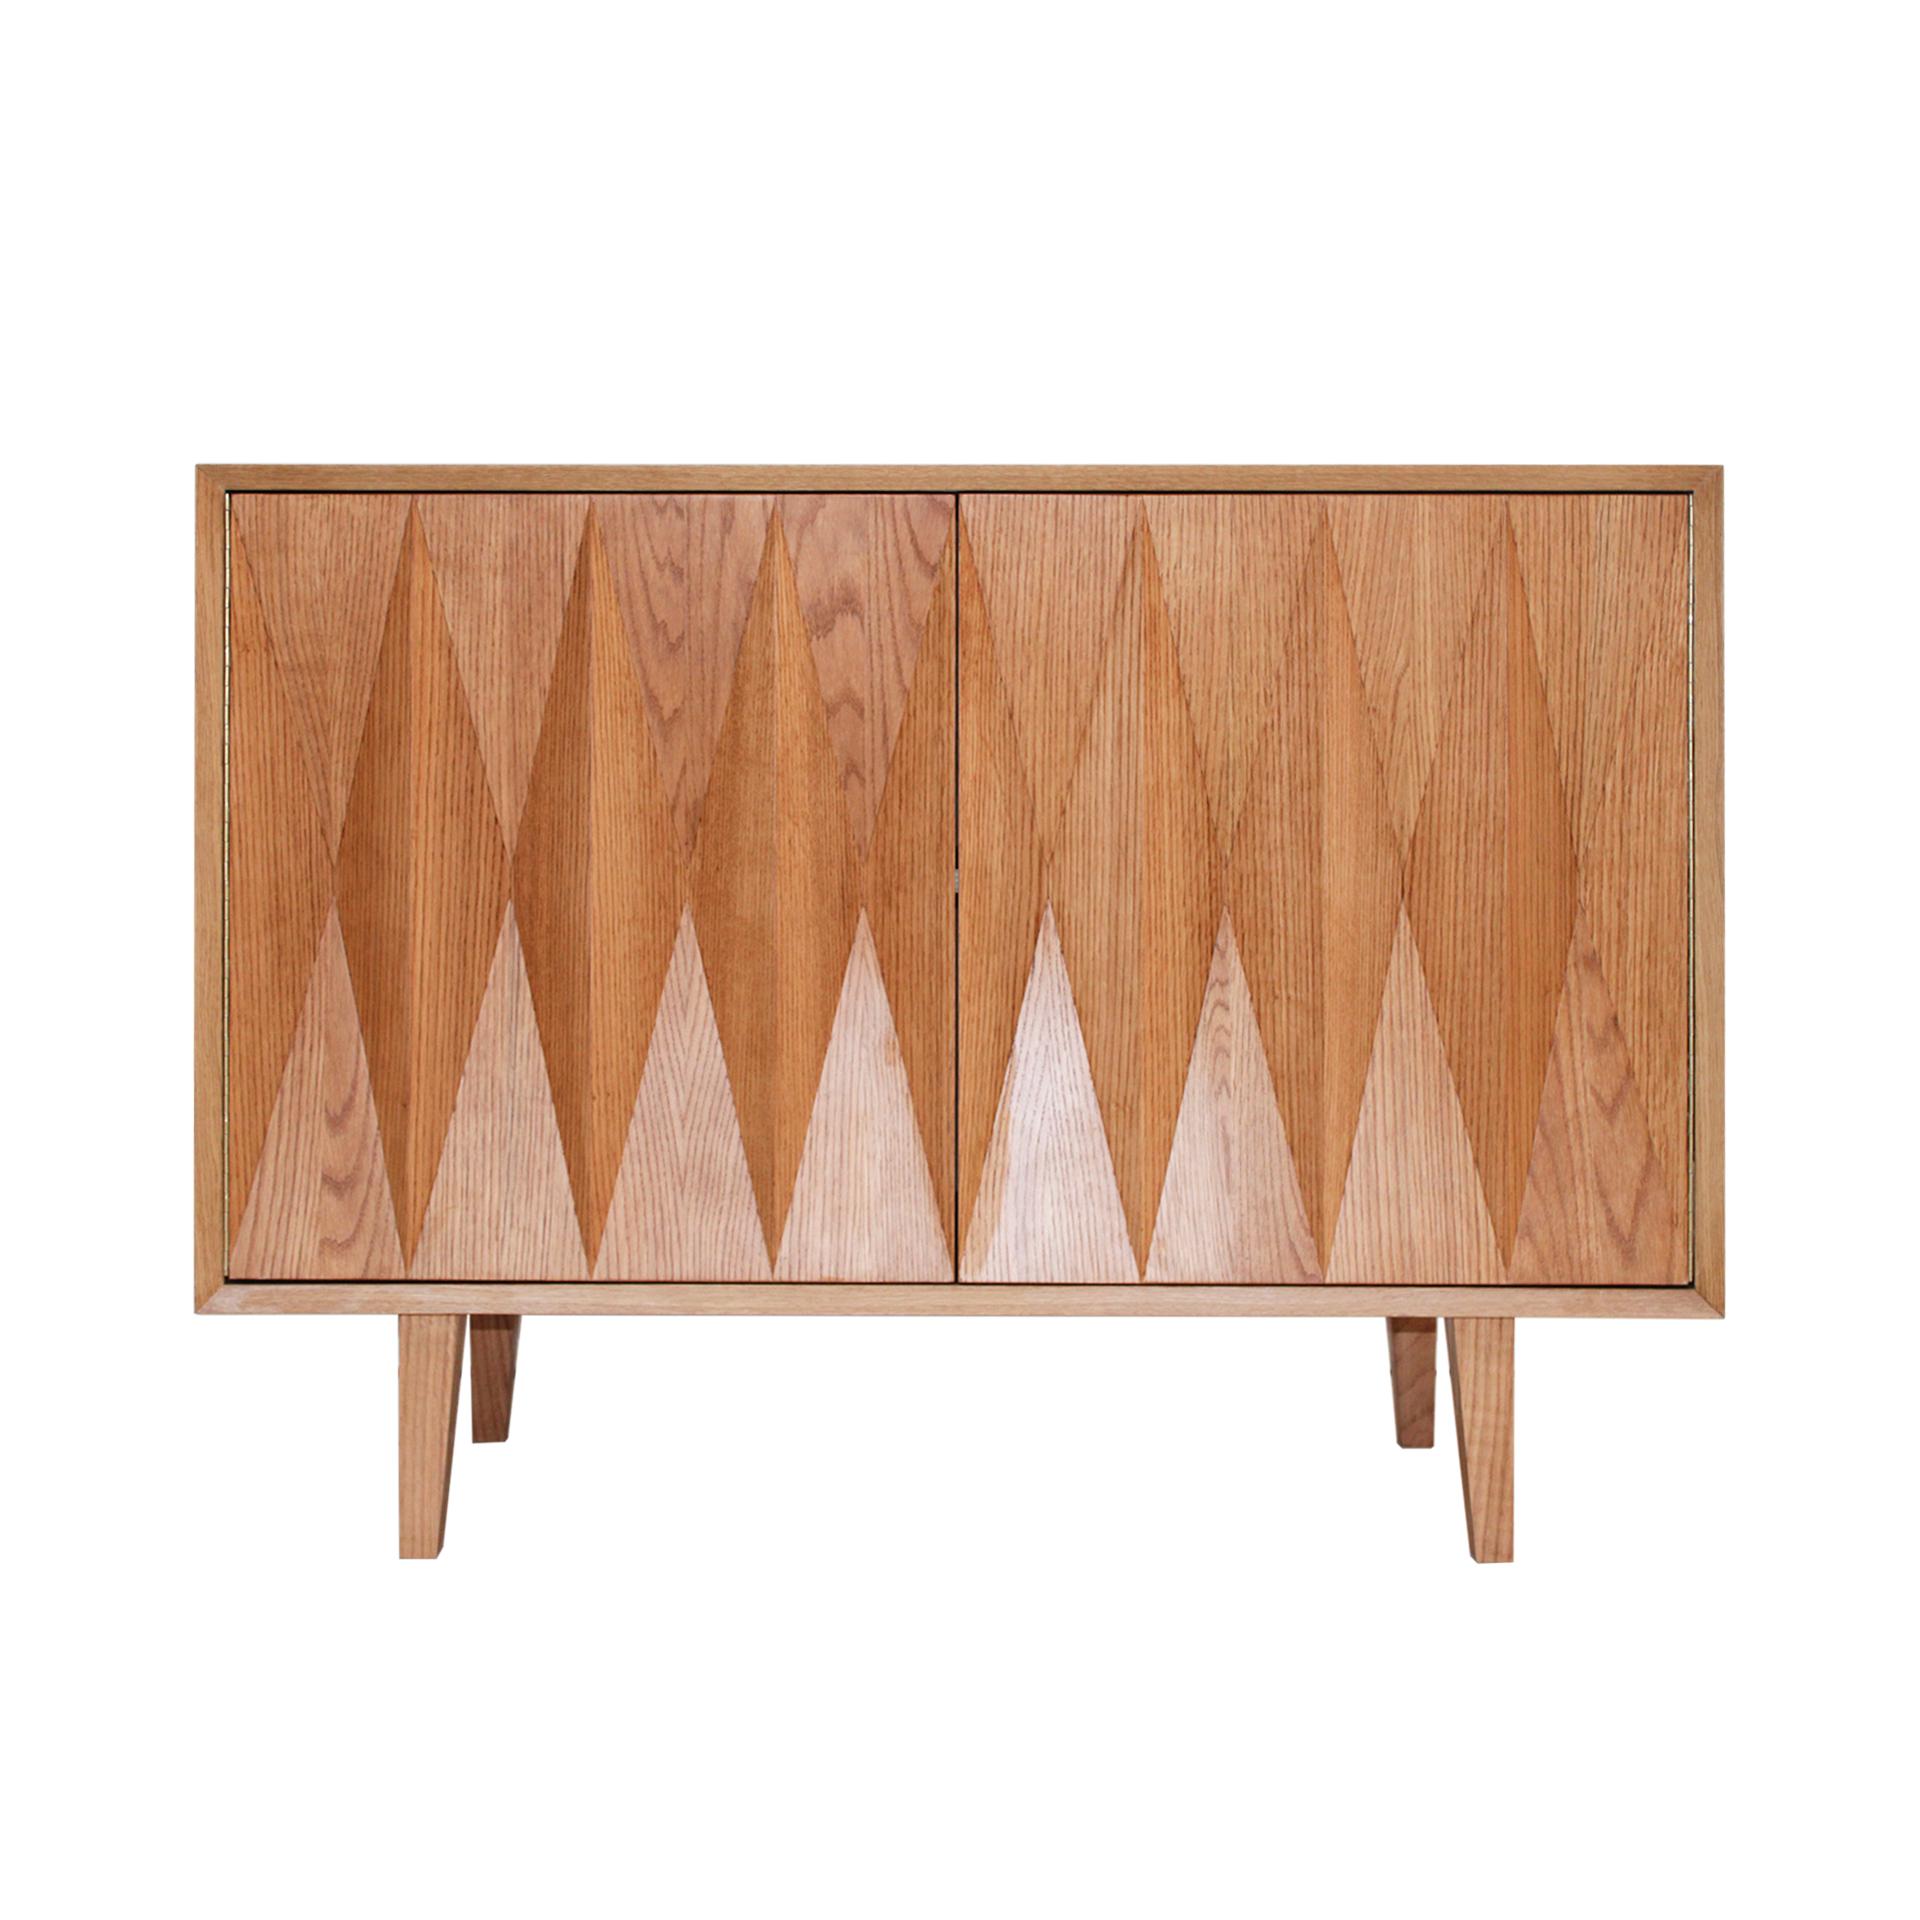 Pair of sideboards consisting of two doors and shelf inside. Handmade in oak wood, with geometric decoration on the front and wooden legs. Interior in oak wood. 

Our main target is customer satisfaction, so we include in the price for this item